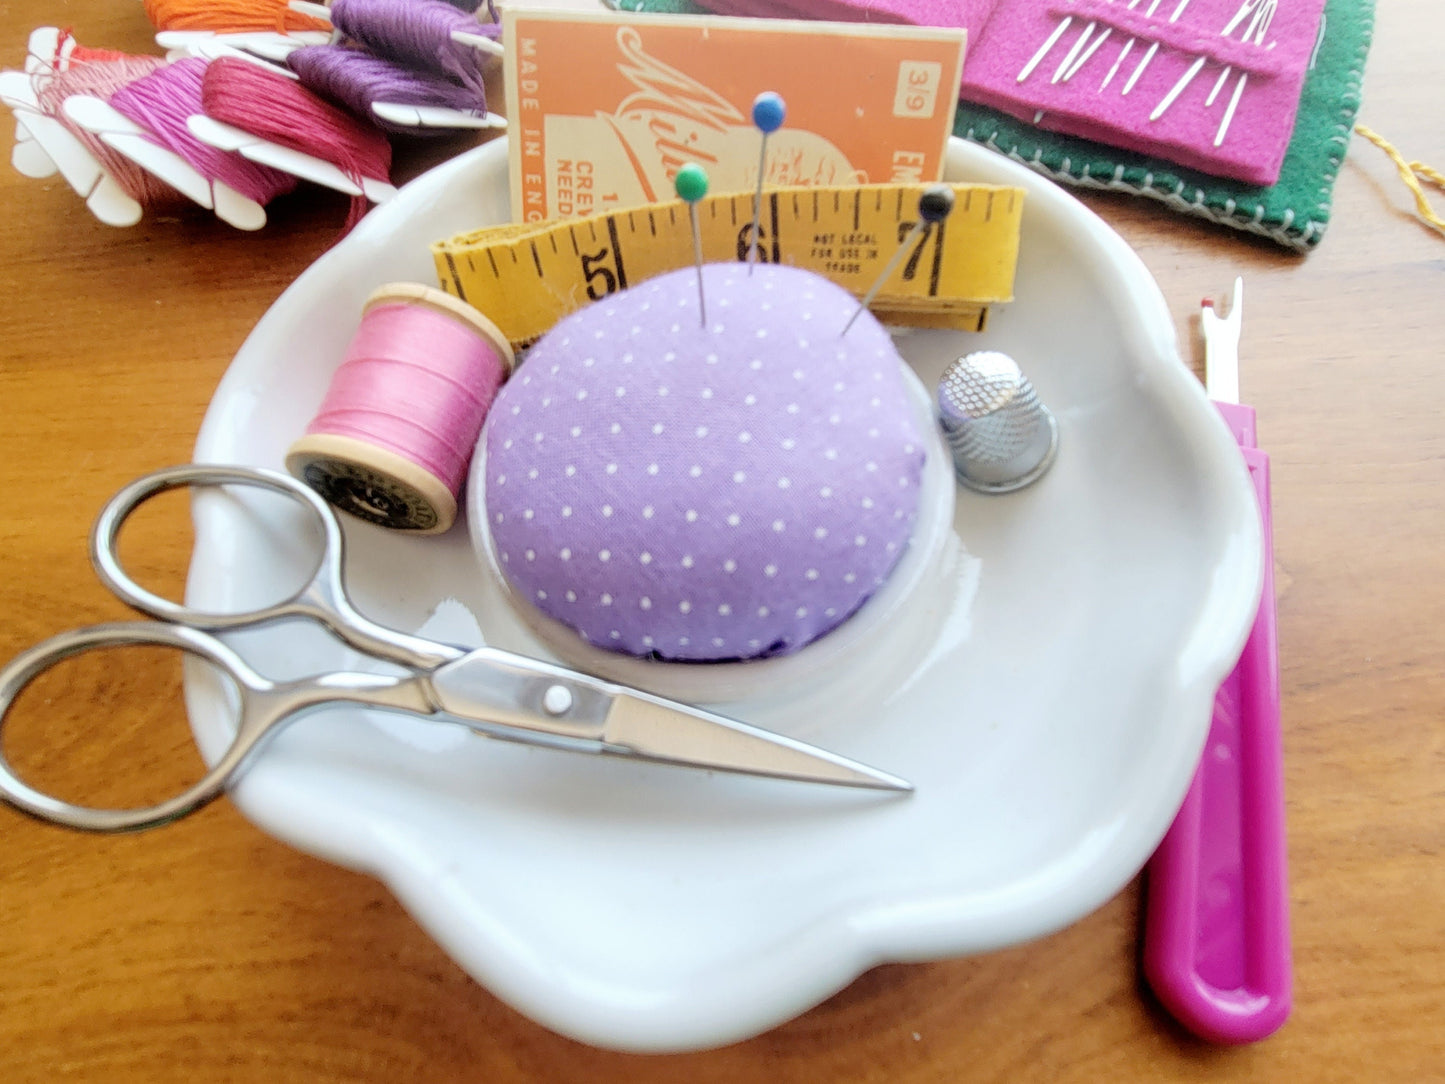 Flower Shaped Pincushion and Sewing Notions Holder Dish - Needle and Bobbin Organizer in Lavender Polka Dot Pattern